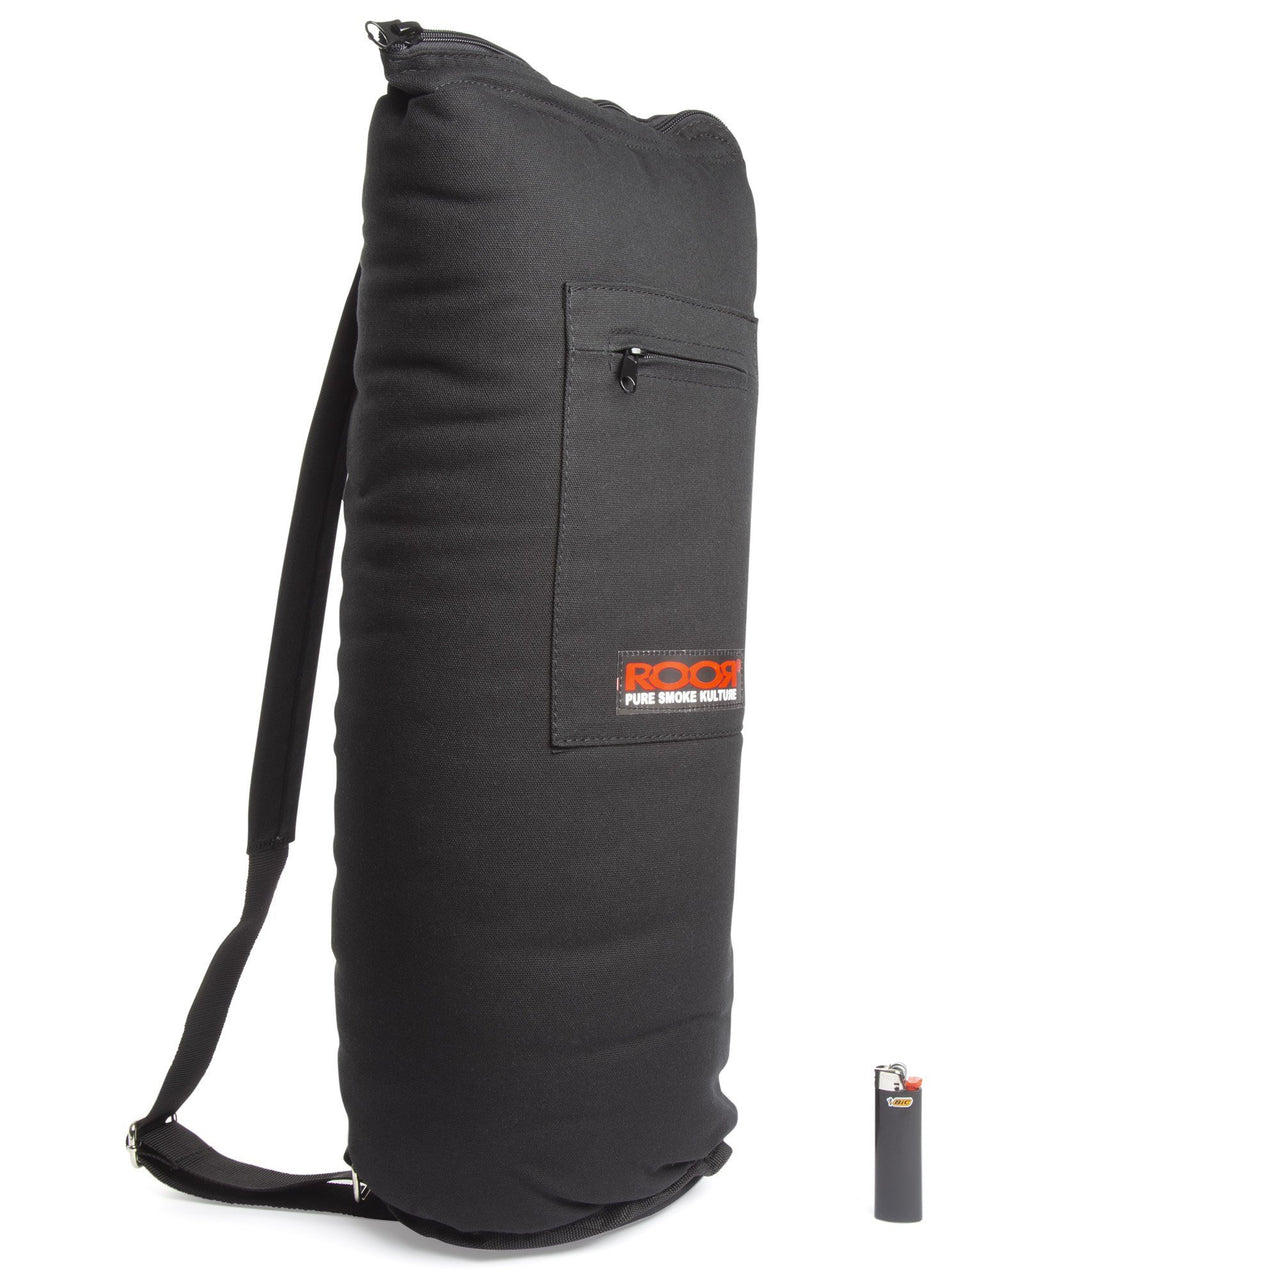 ROOR 24in Padded Bong Bag - 420 Science - The most trusted online smoke shop.